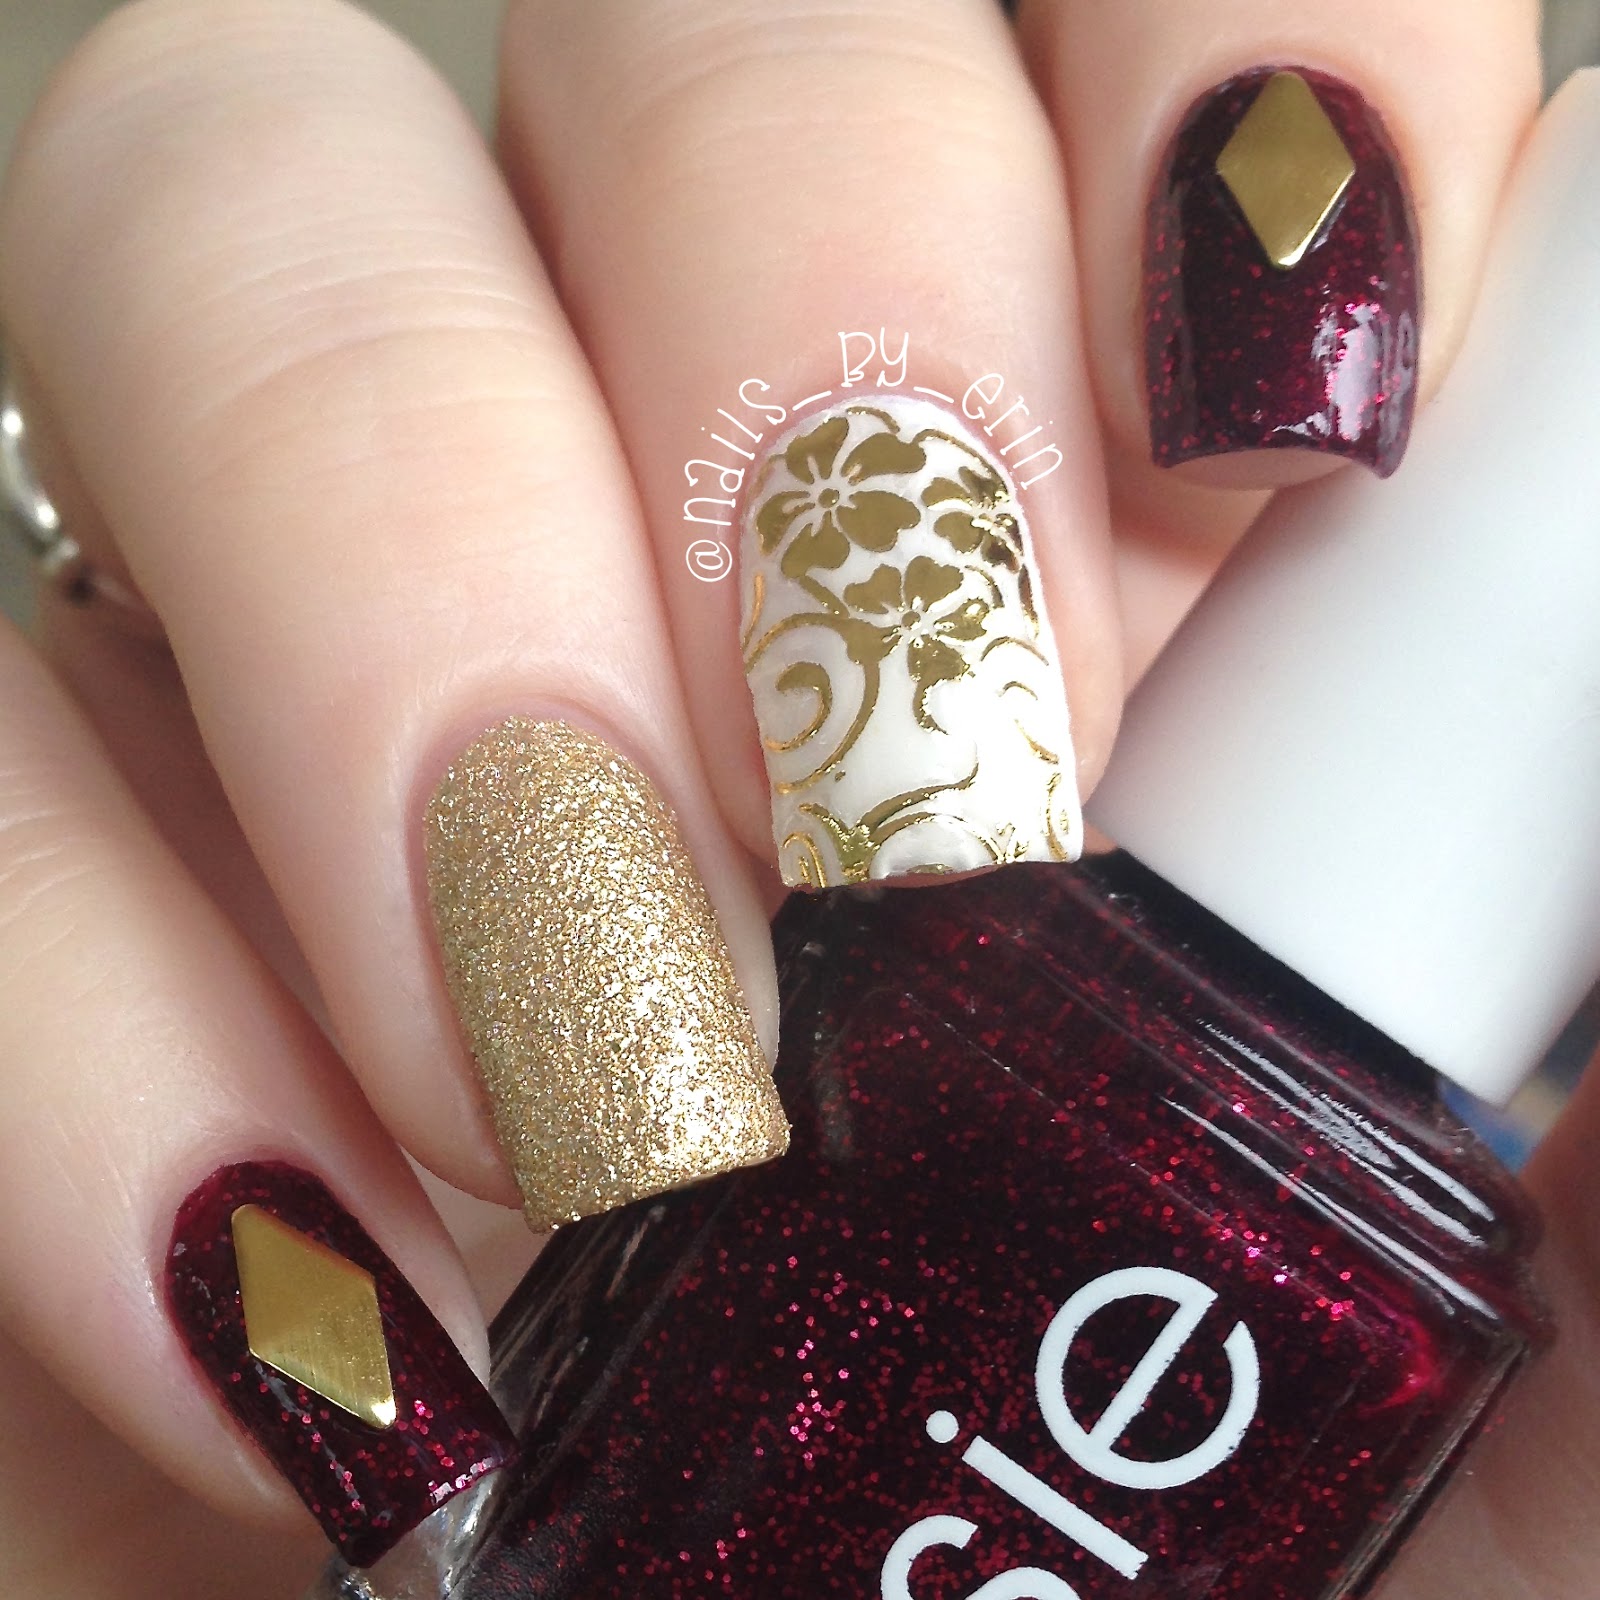 NailsByErin: Red and Gold Studded Nails | LightInTheBox.com Review